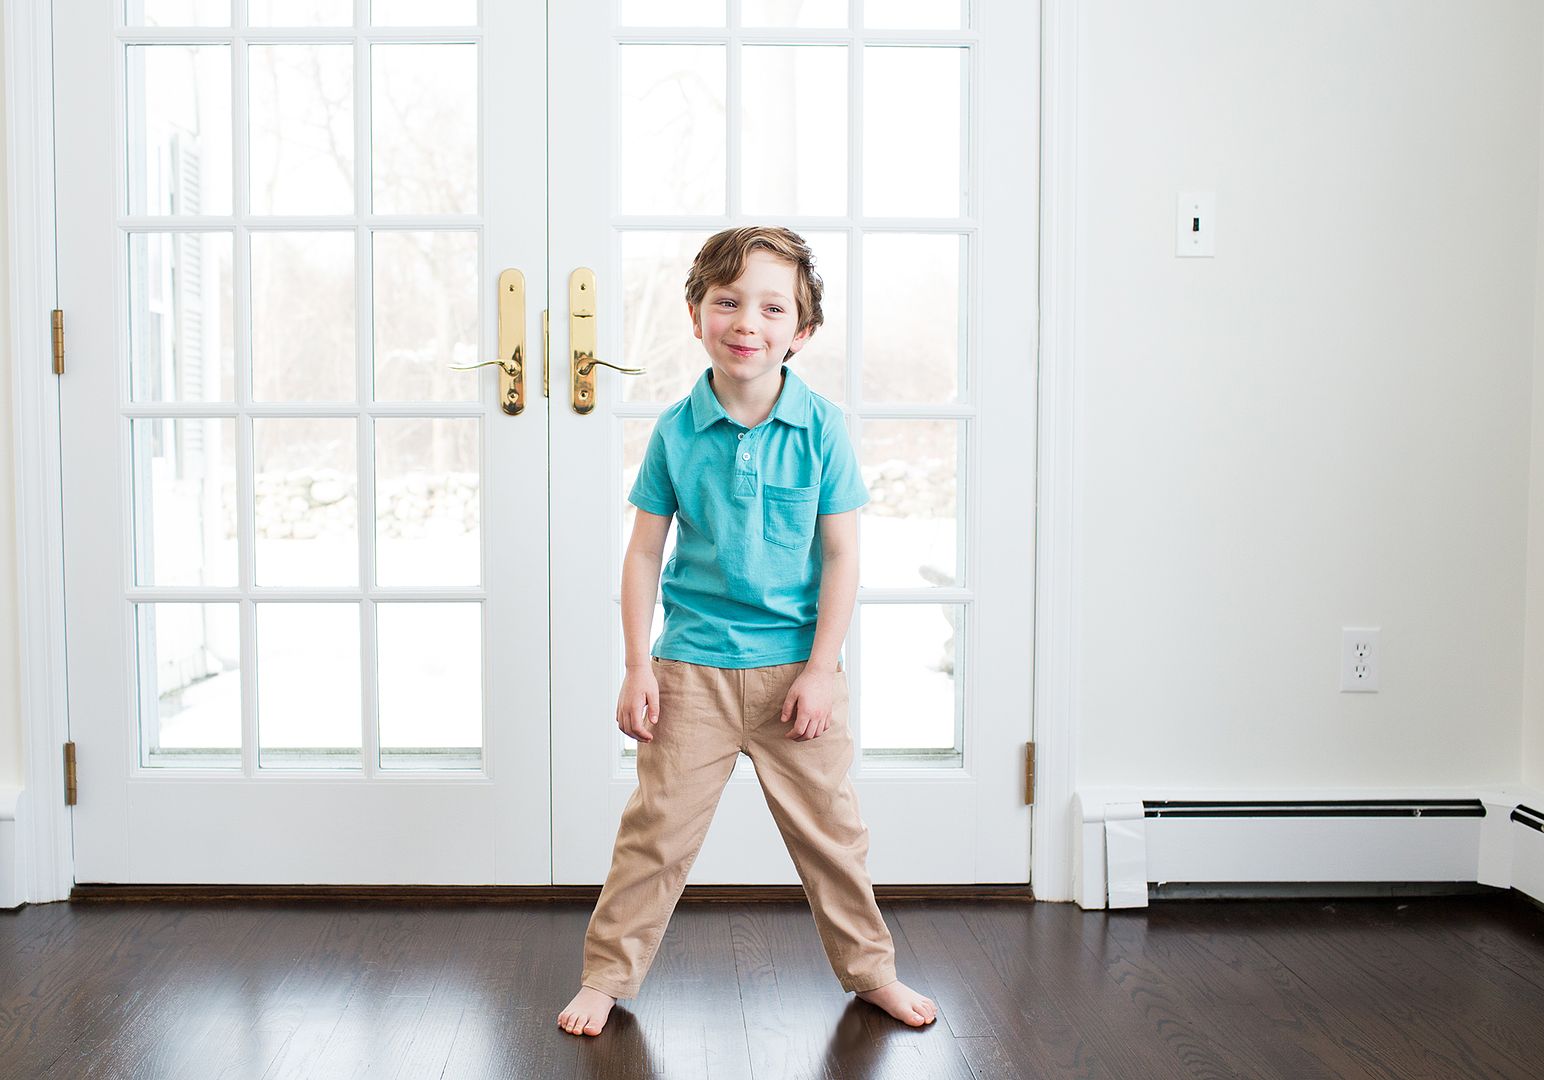 Affordable basics for kids in gorgeous colors at Primary